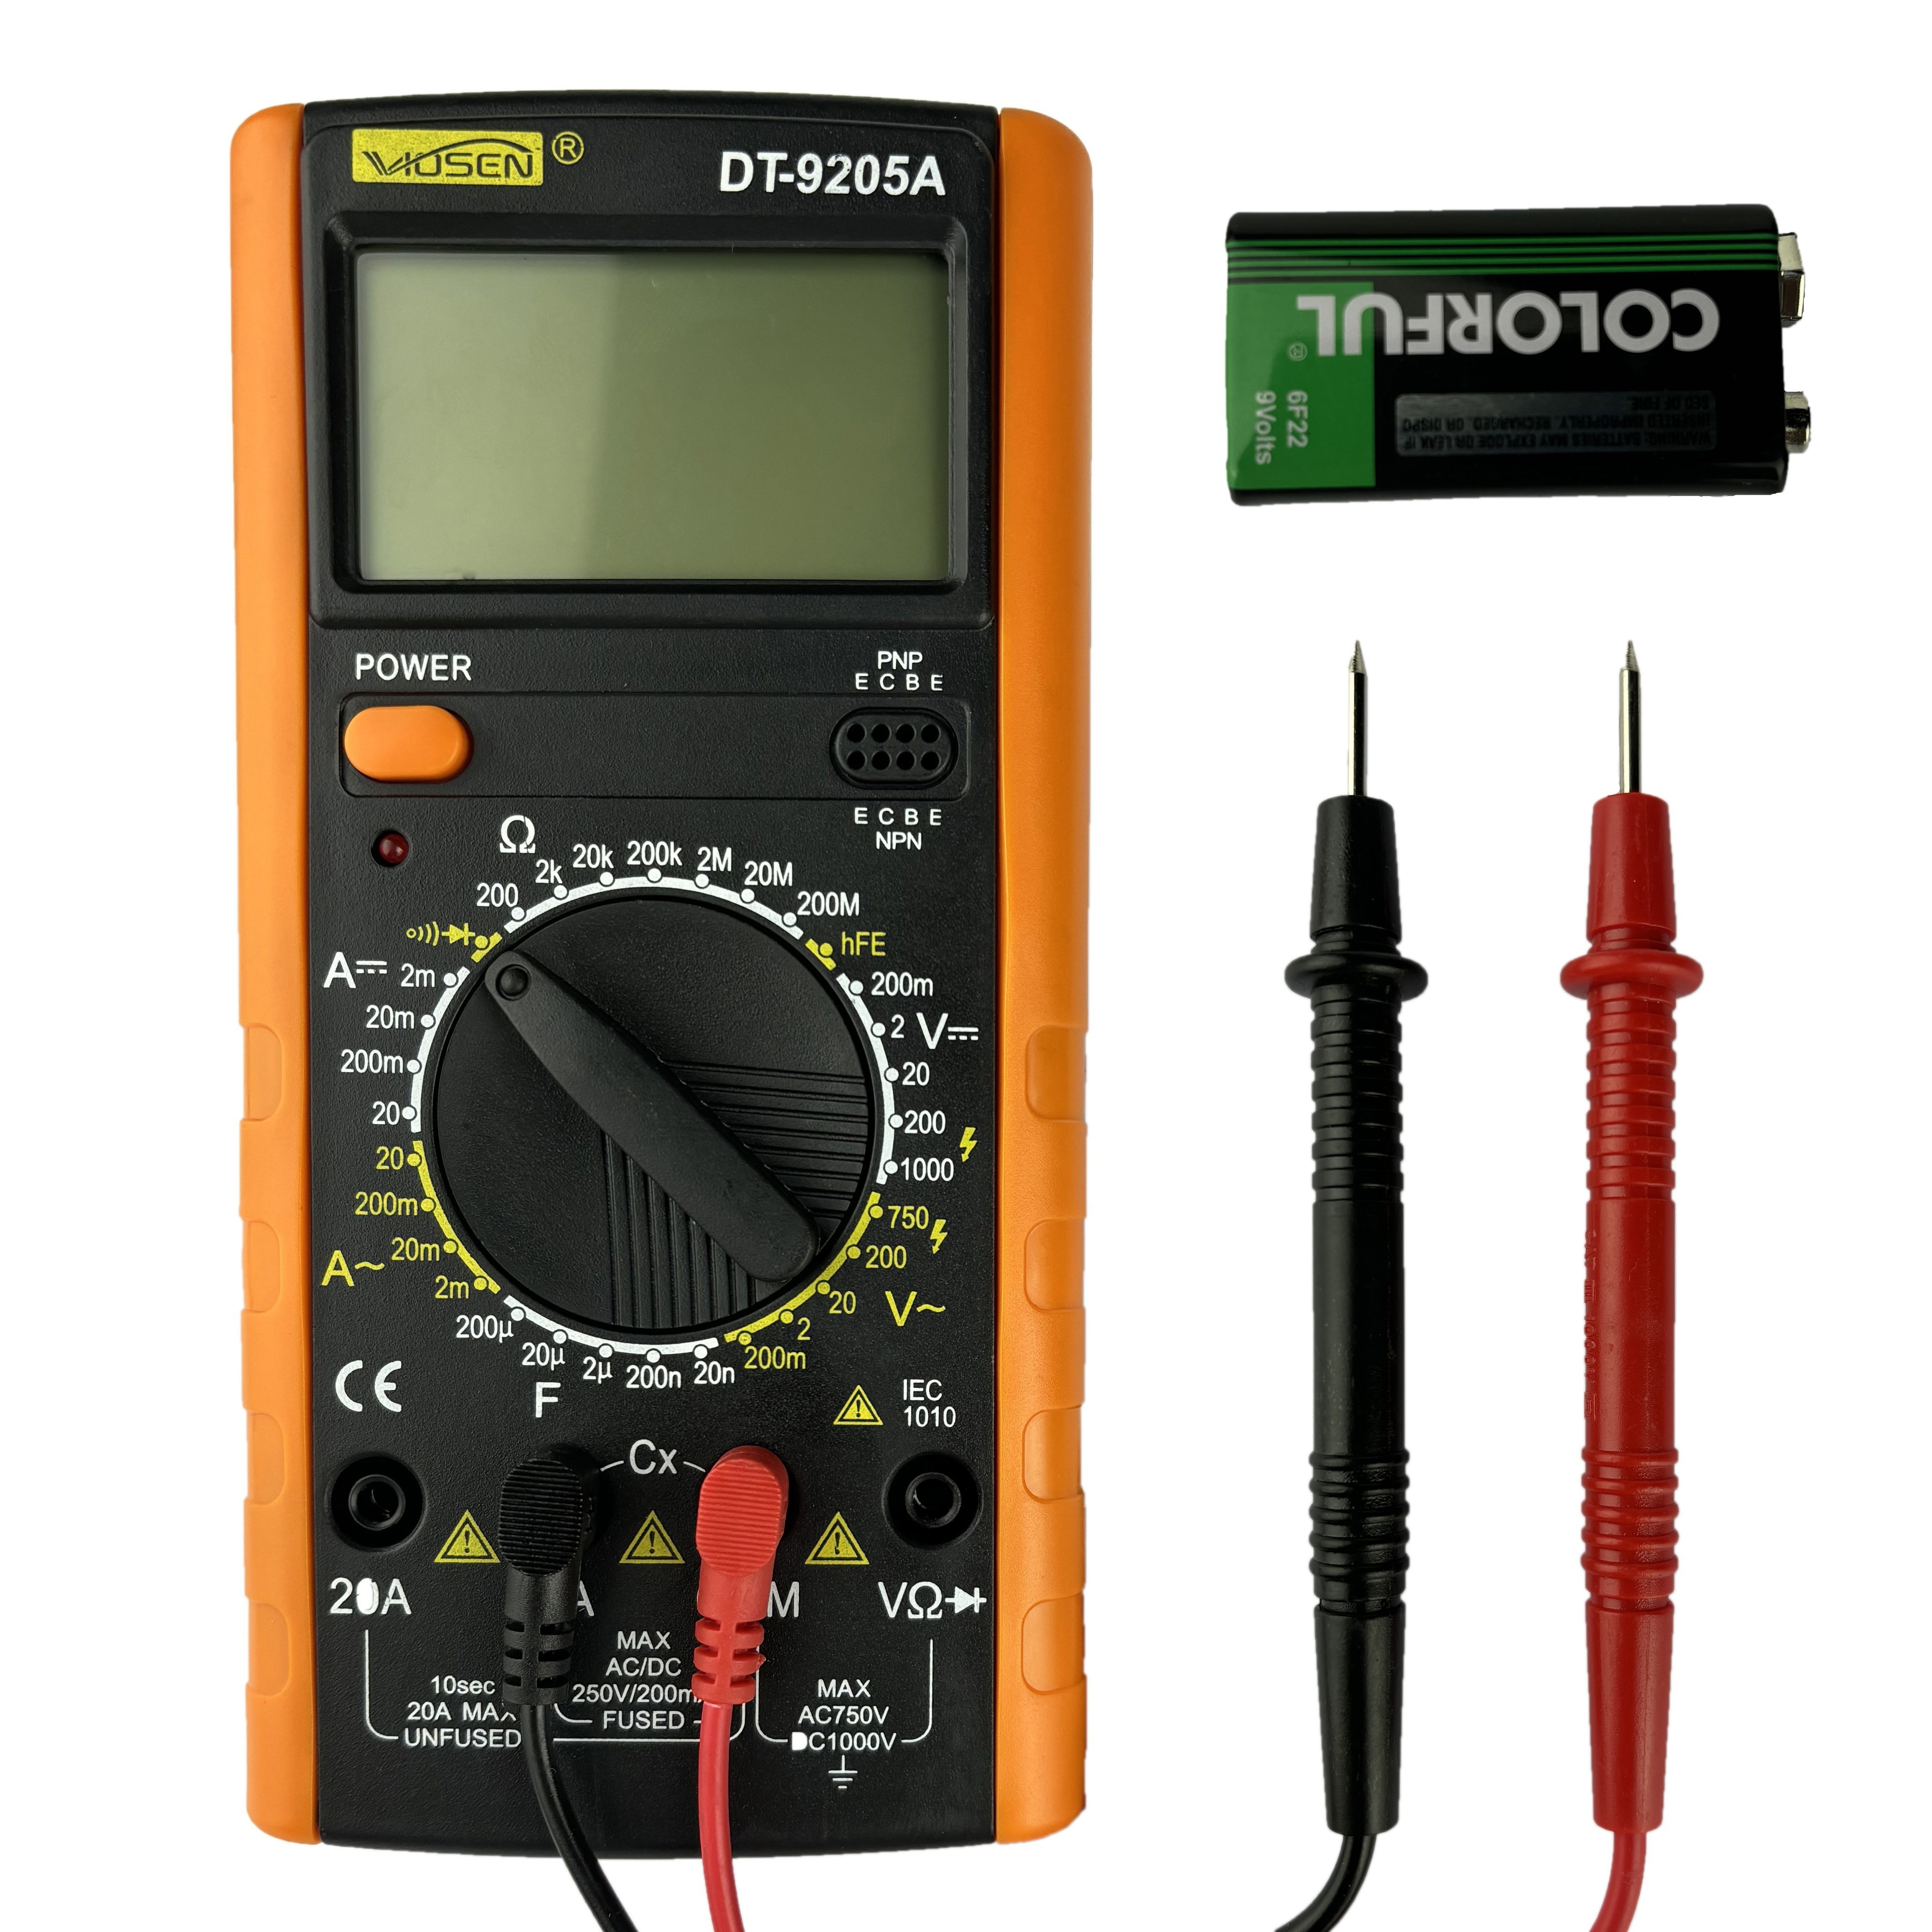 

1pc Digital Multimeter Dt-9205a, Accurate Voltage, Current, Resistance, Diode, Continuity, Duty Cycle, And Capacitance Measurement, Handheld Ohmmeter Voltmeter With Lcd Display And Test Leads